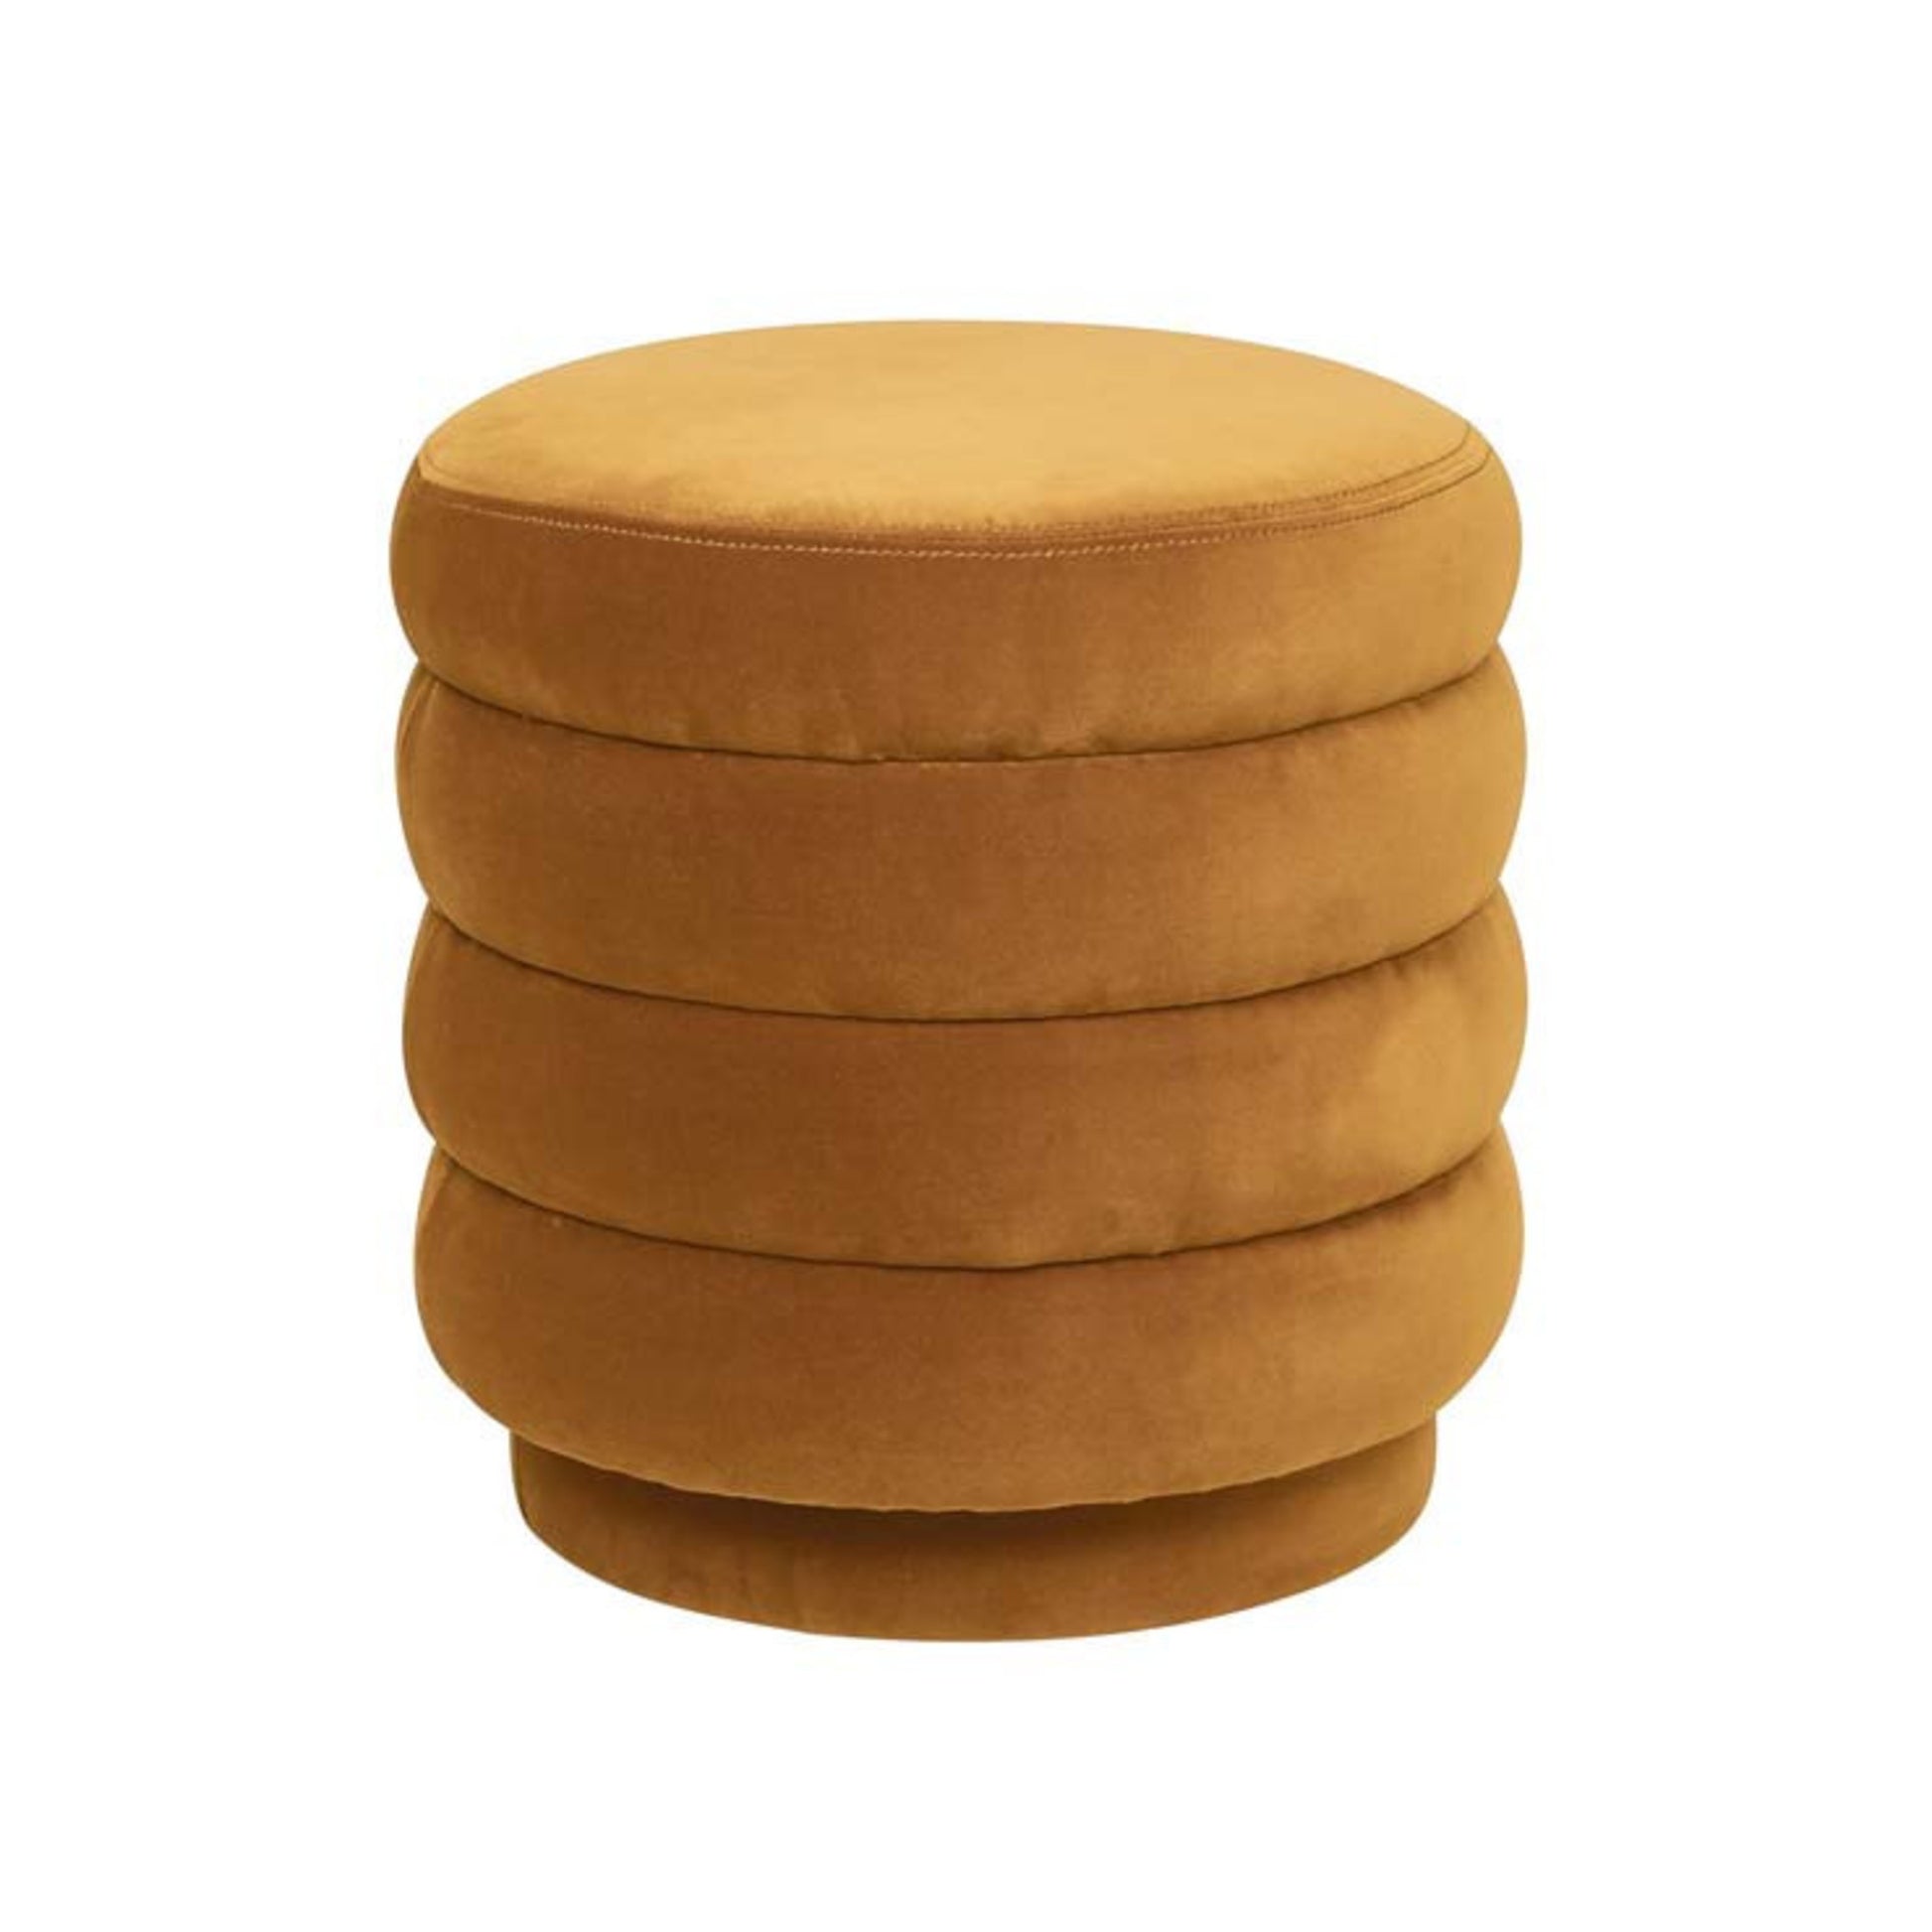 Kennedy ribbed round ottoman in toffee